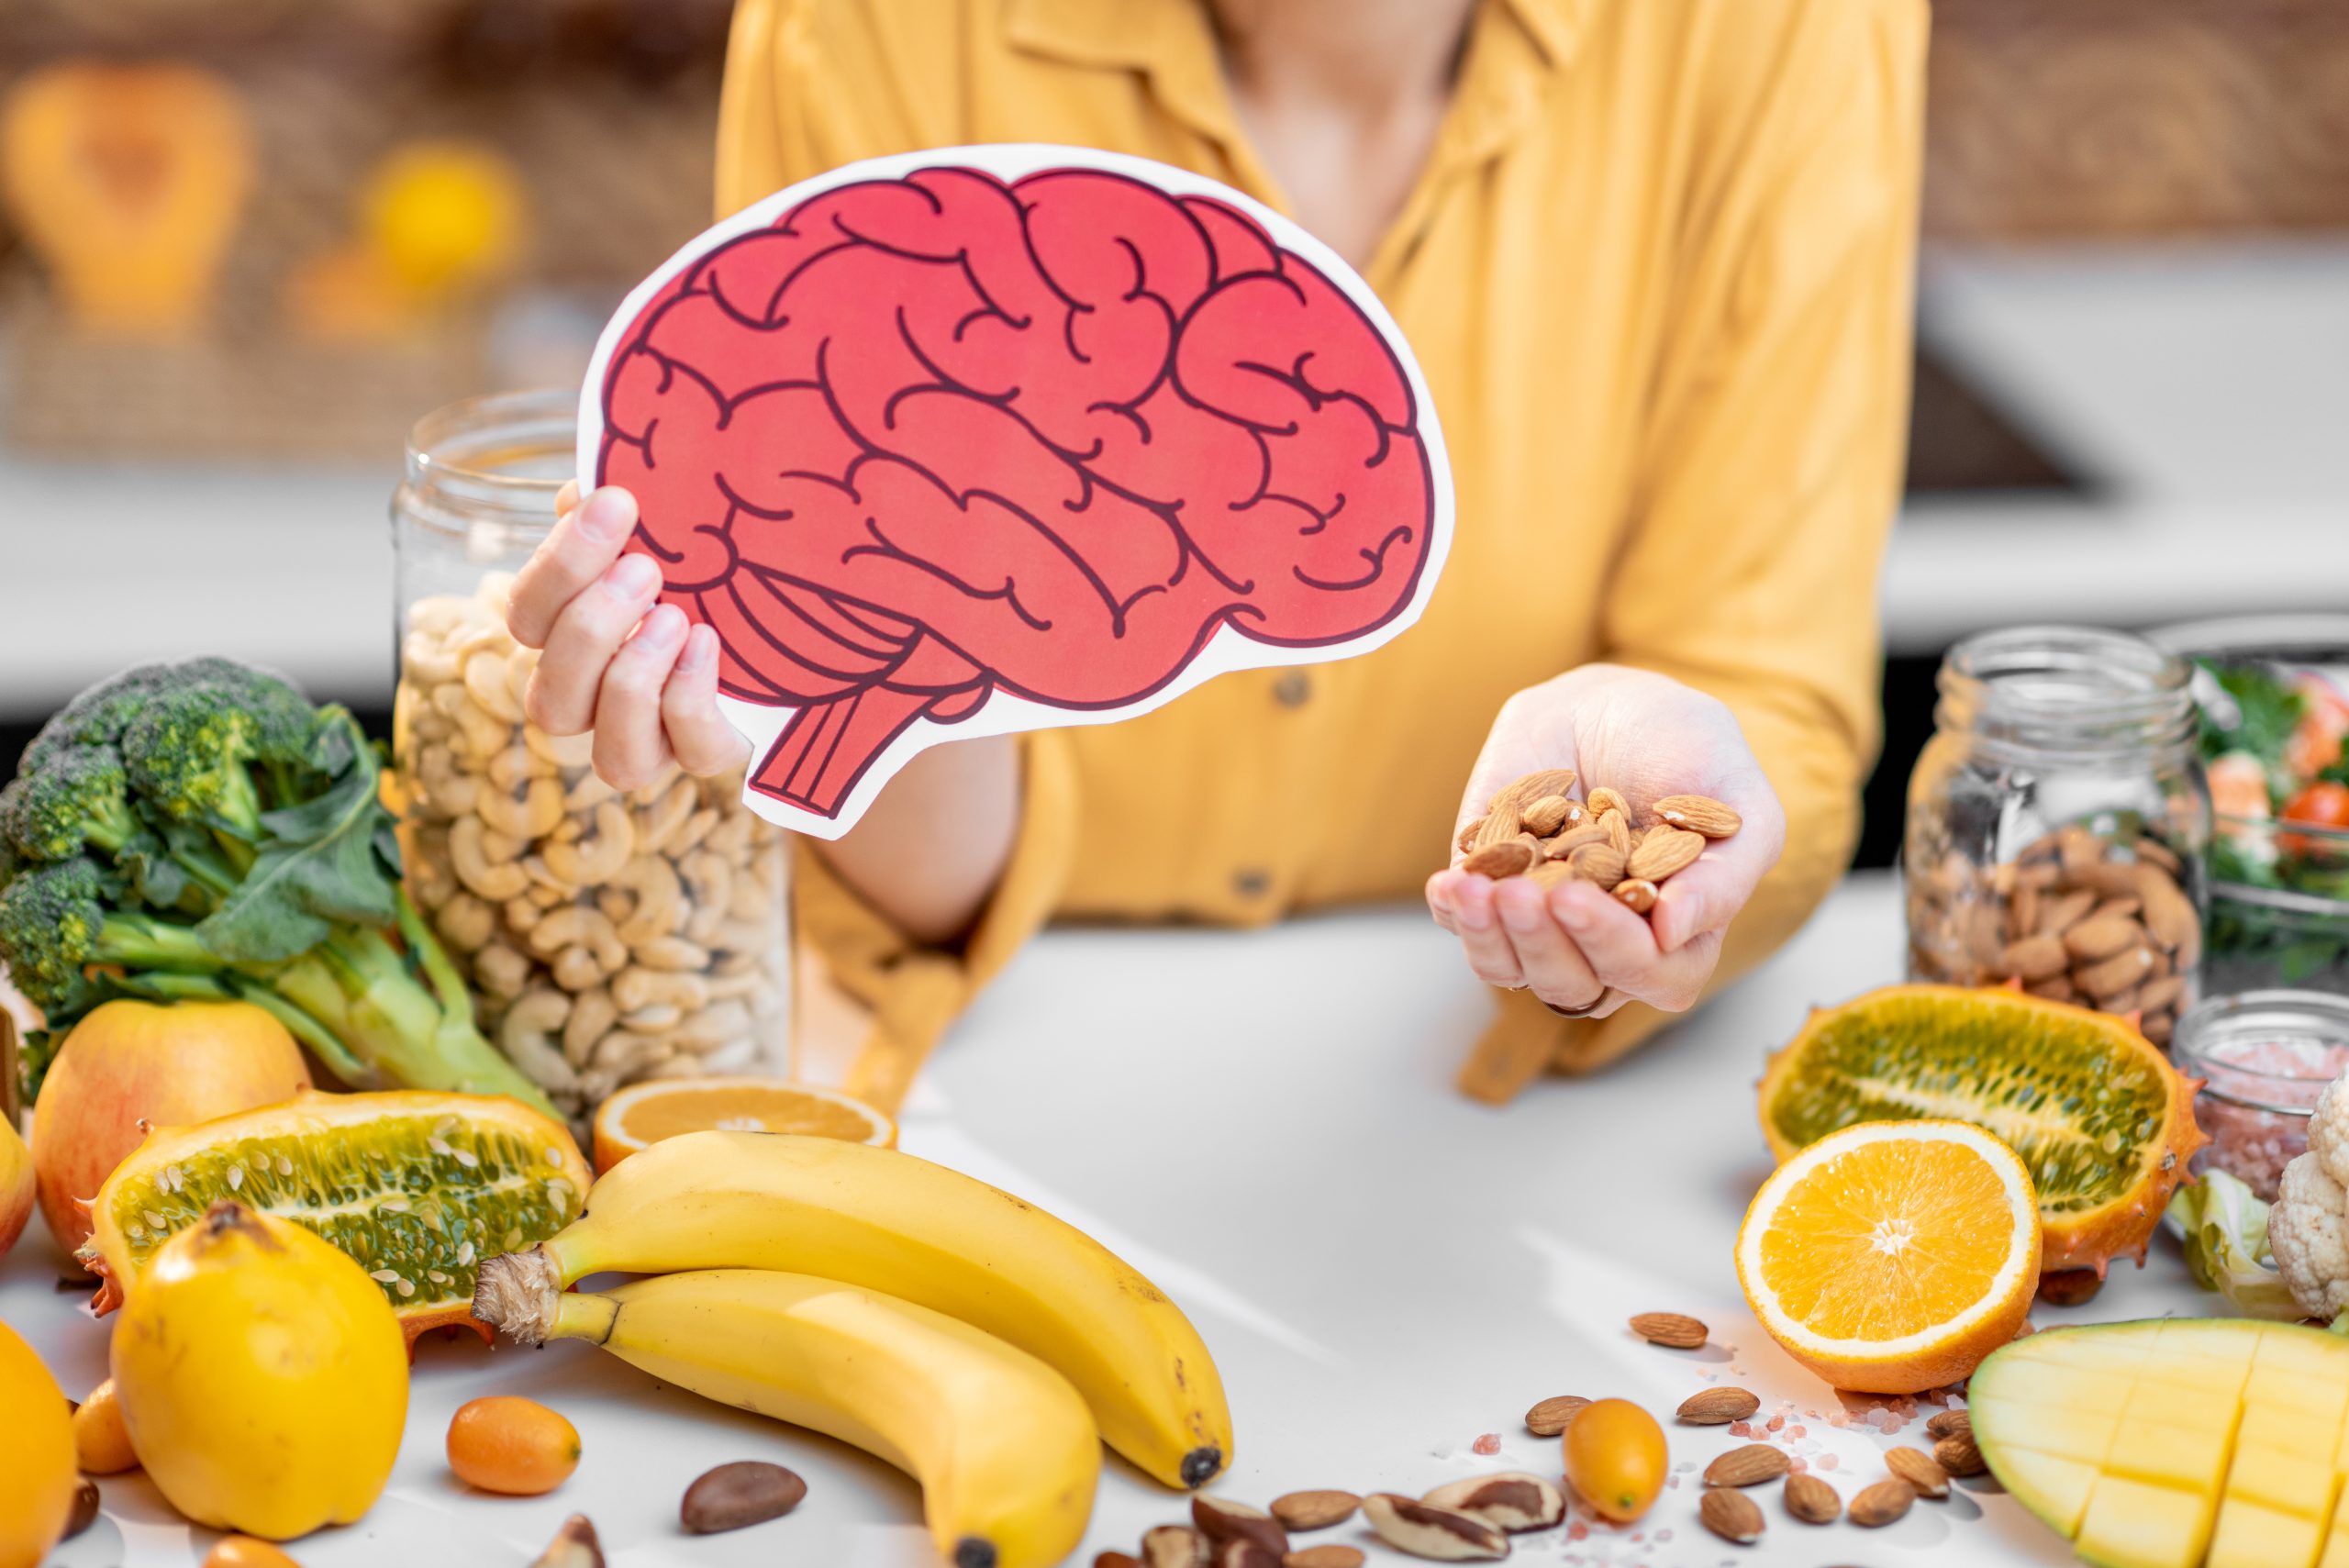 Human brain model and variety of healthy fresh food